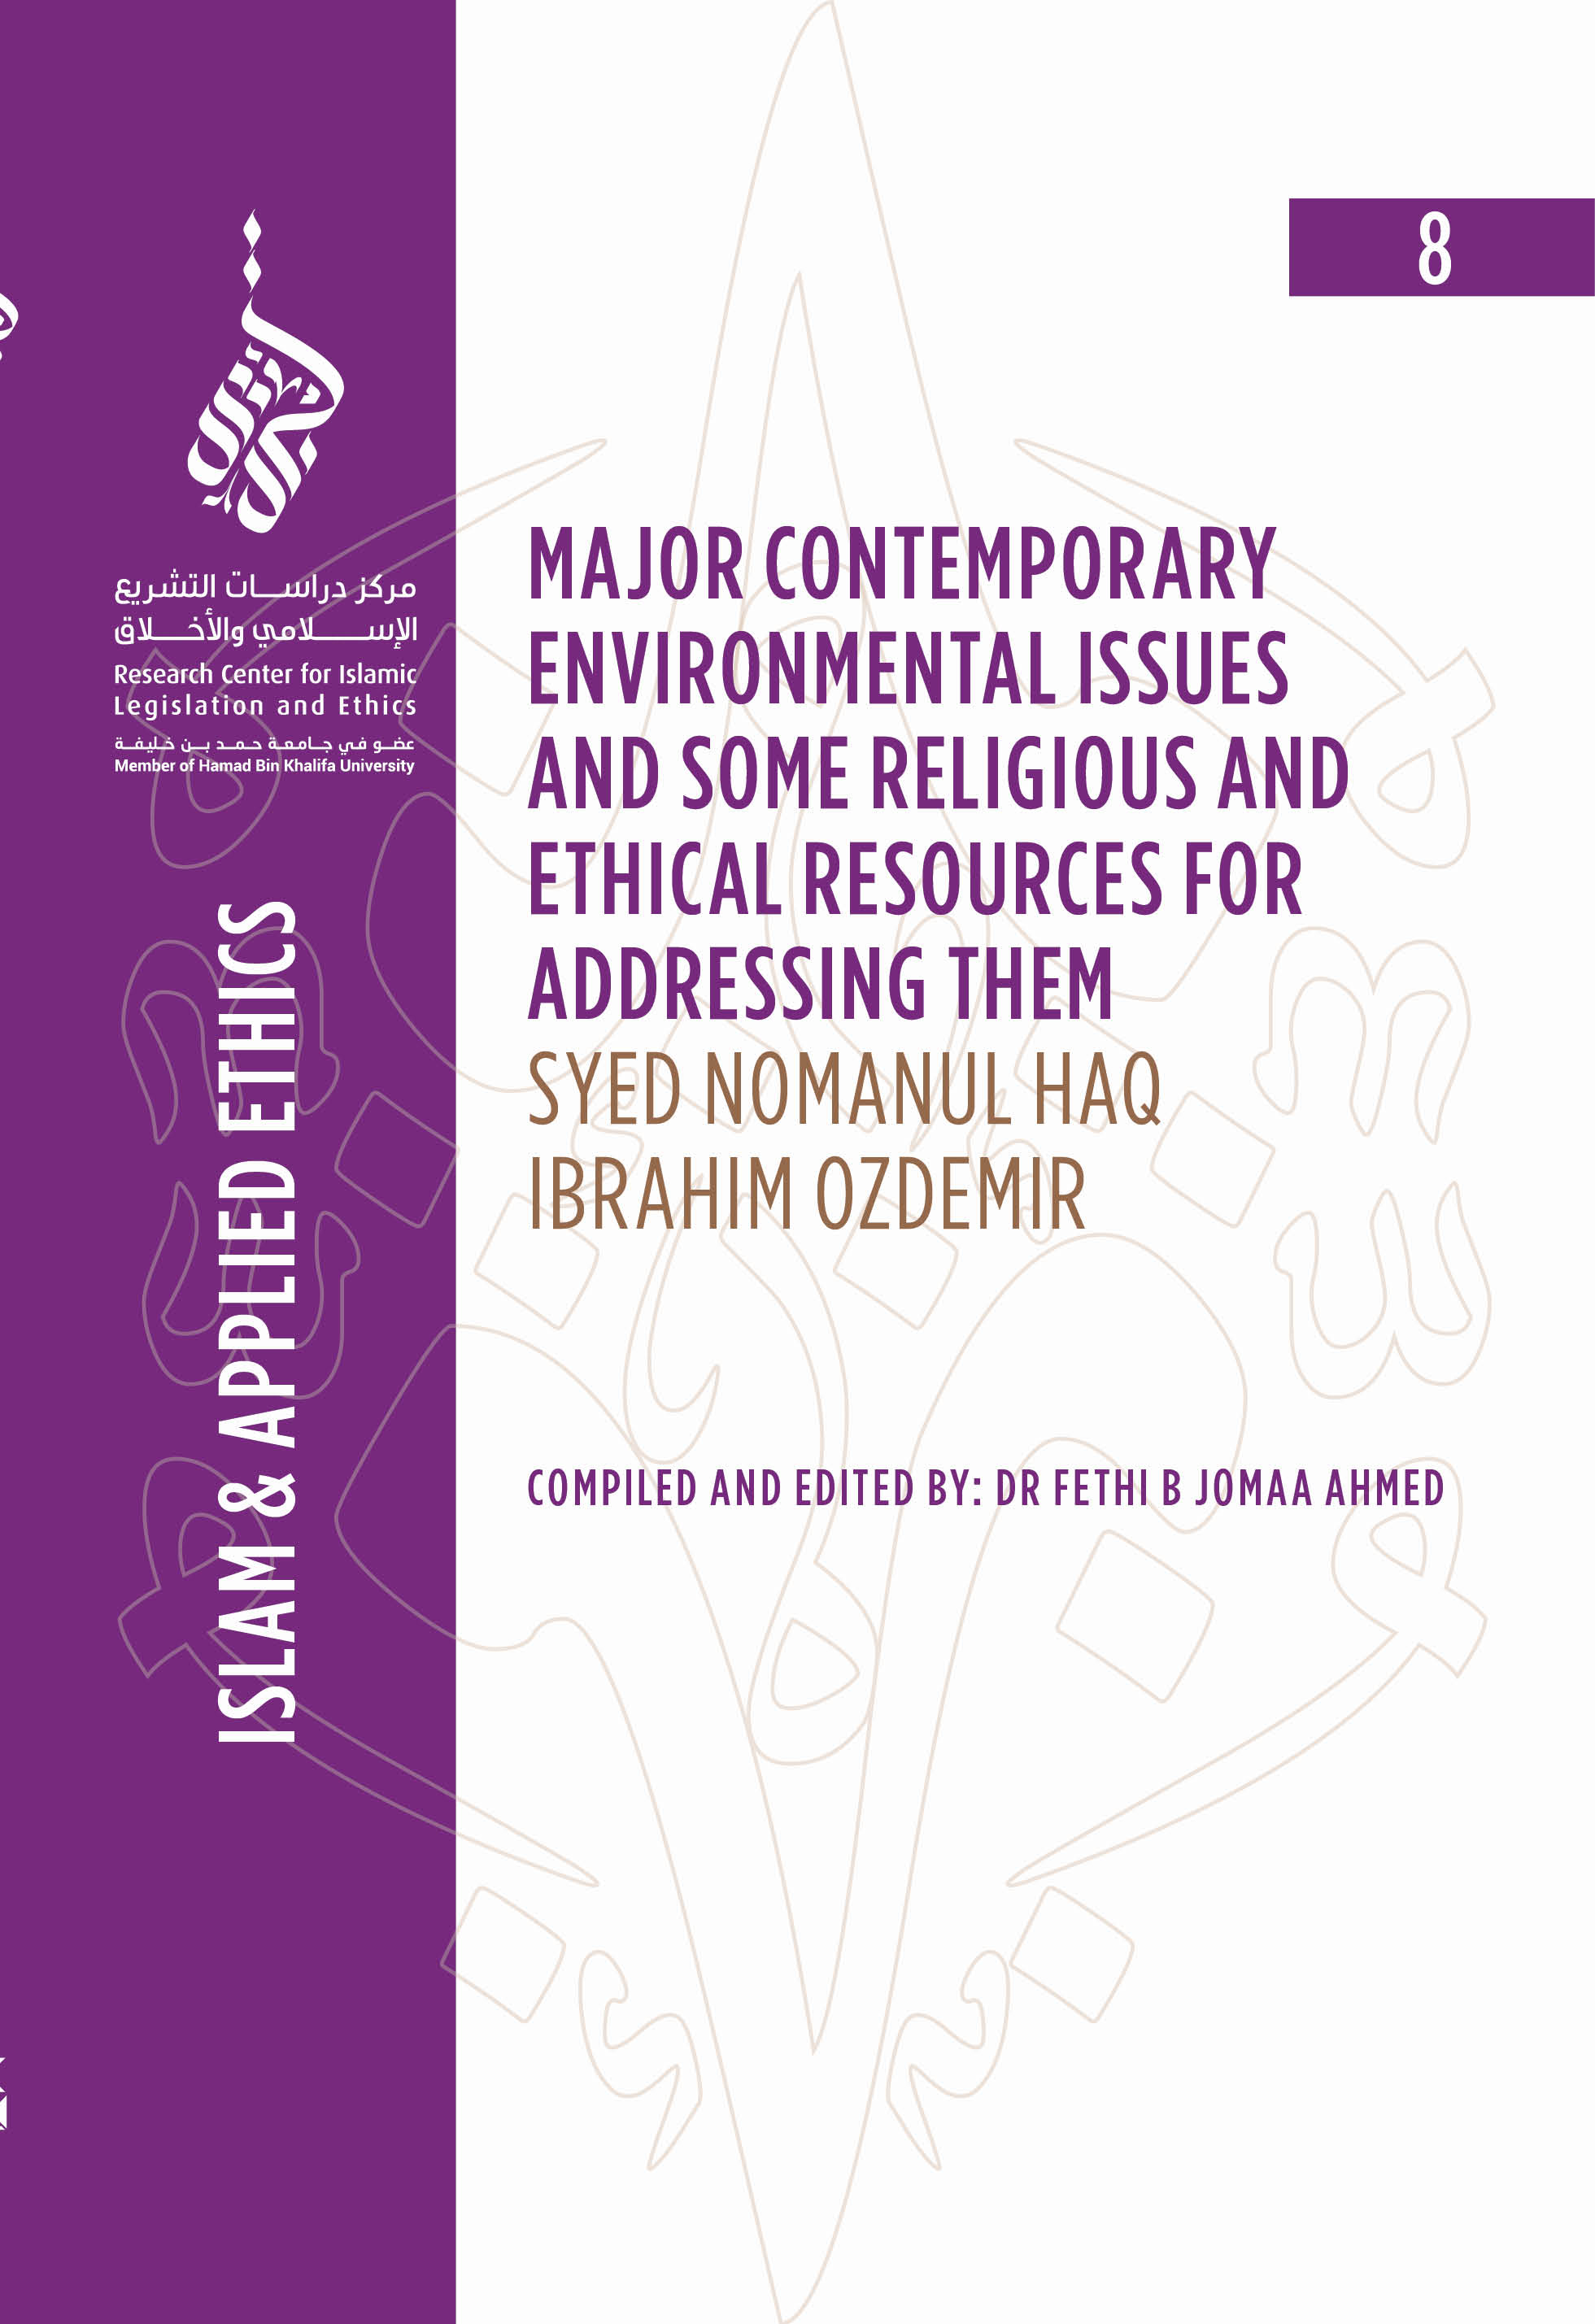 image of Major Contemporary Environmental Issues and Some Religious and Ethical Resources for Addressing Them